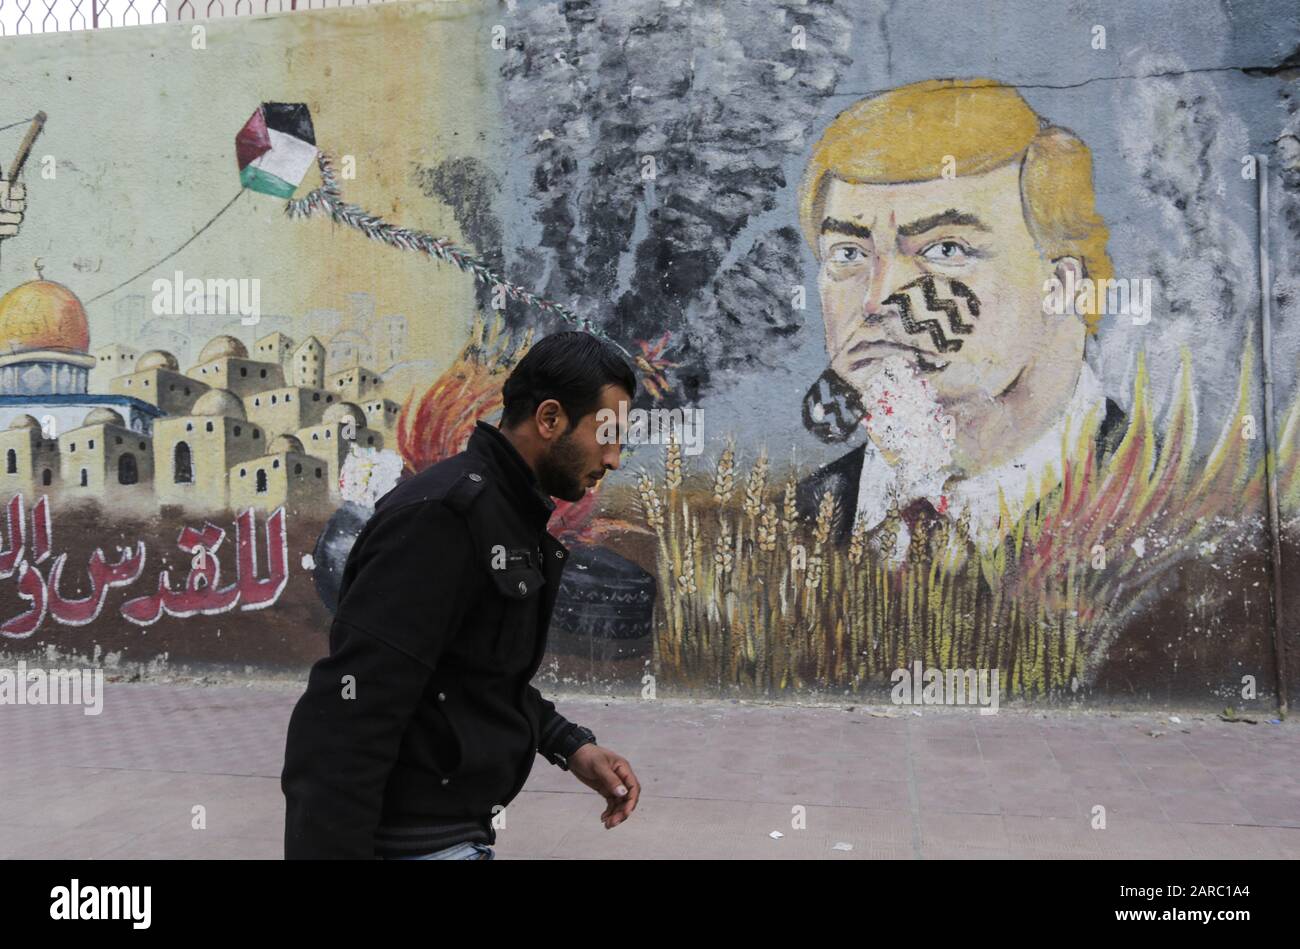 January 27, 2020, Gaza City, The Gaza Strip, Palestine: A Palestinian walks past a drawing of a wall drawn by Palestinian protesters showing the United States Donald J. Trump with a fingerprint on his face in the streets of Gaza City, Gaza Strip, on January 27, 2020 in Gaza City. - Palestinian Prime Minister Muhammad Shtayeh today called on international powers to boycott an American peace plan they see as biased towards Israel, as Israeli Prime Minister Benjamin Netanyahu and his political rival Benny Gantz are scheduled to meet with Donald Trump in Washington, and the American President is e Stock Photo